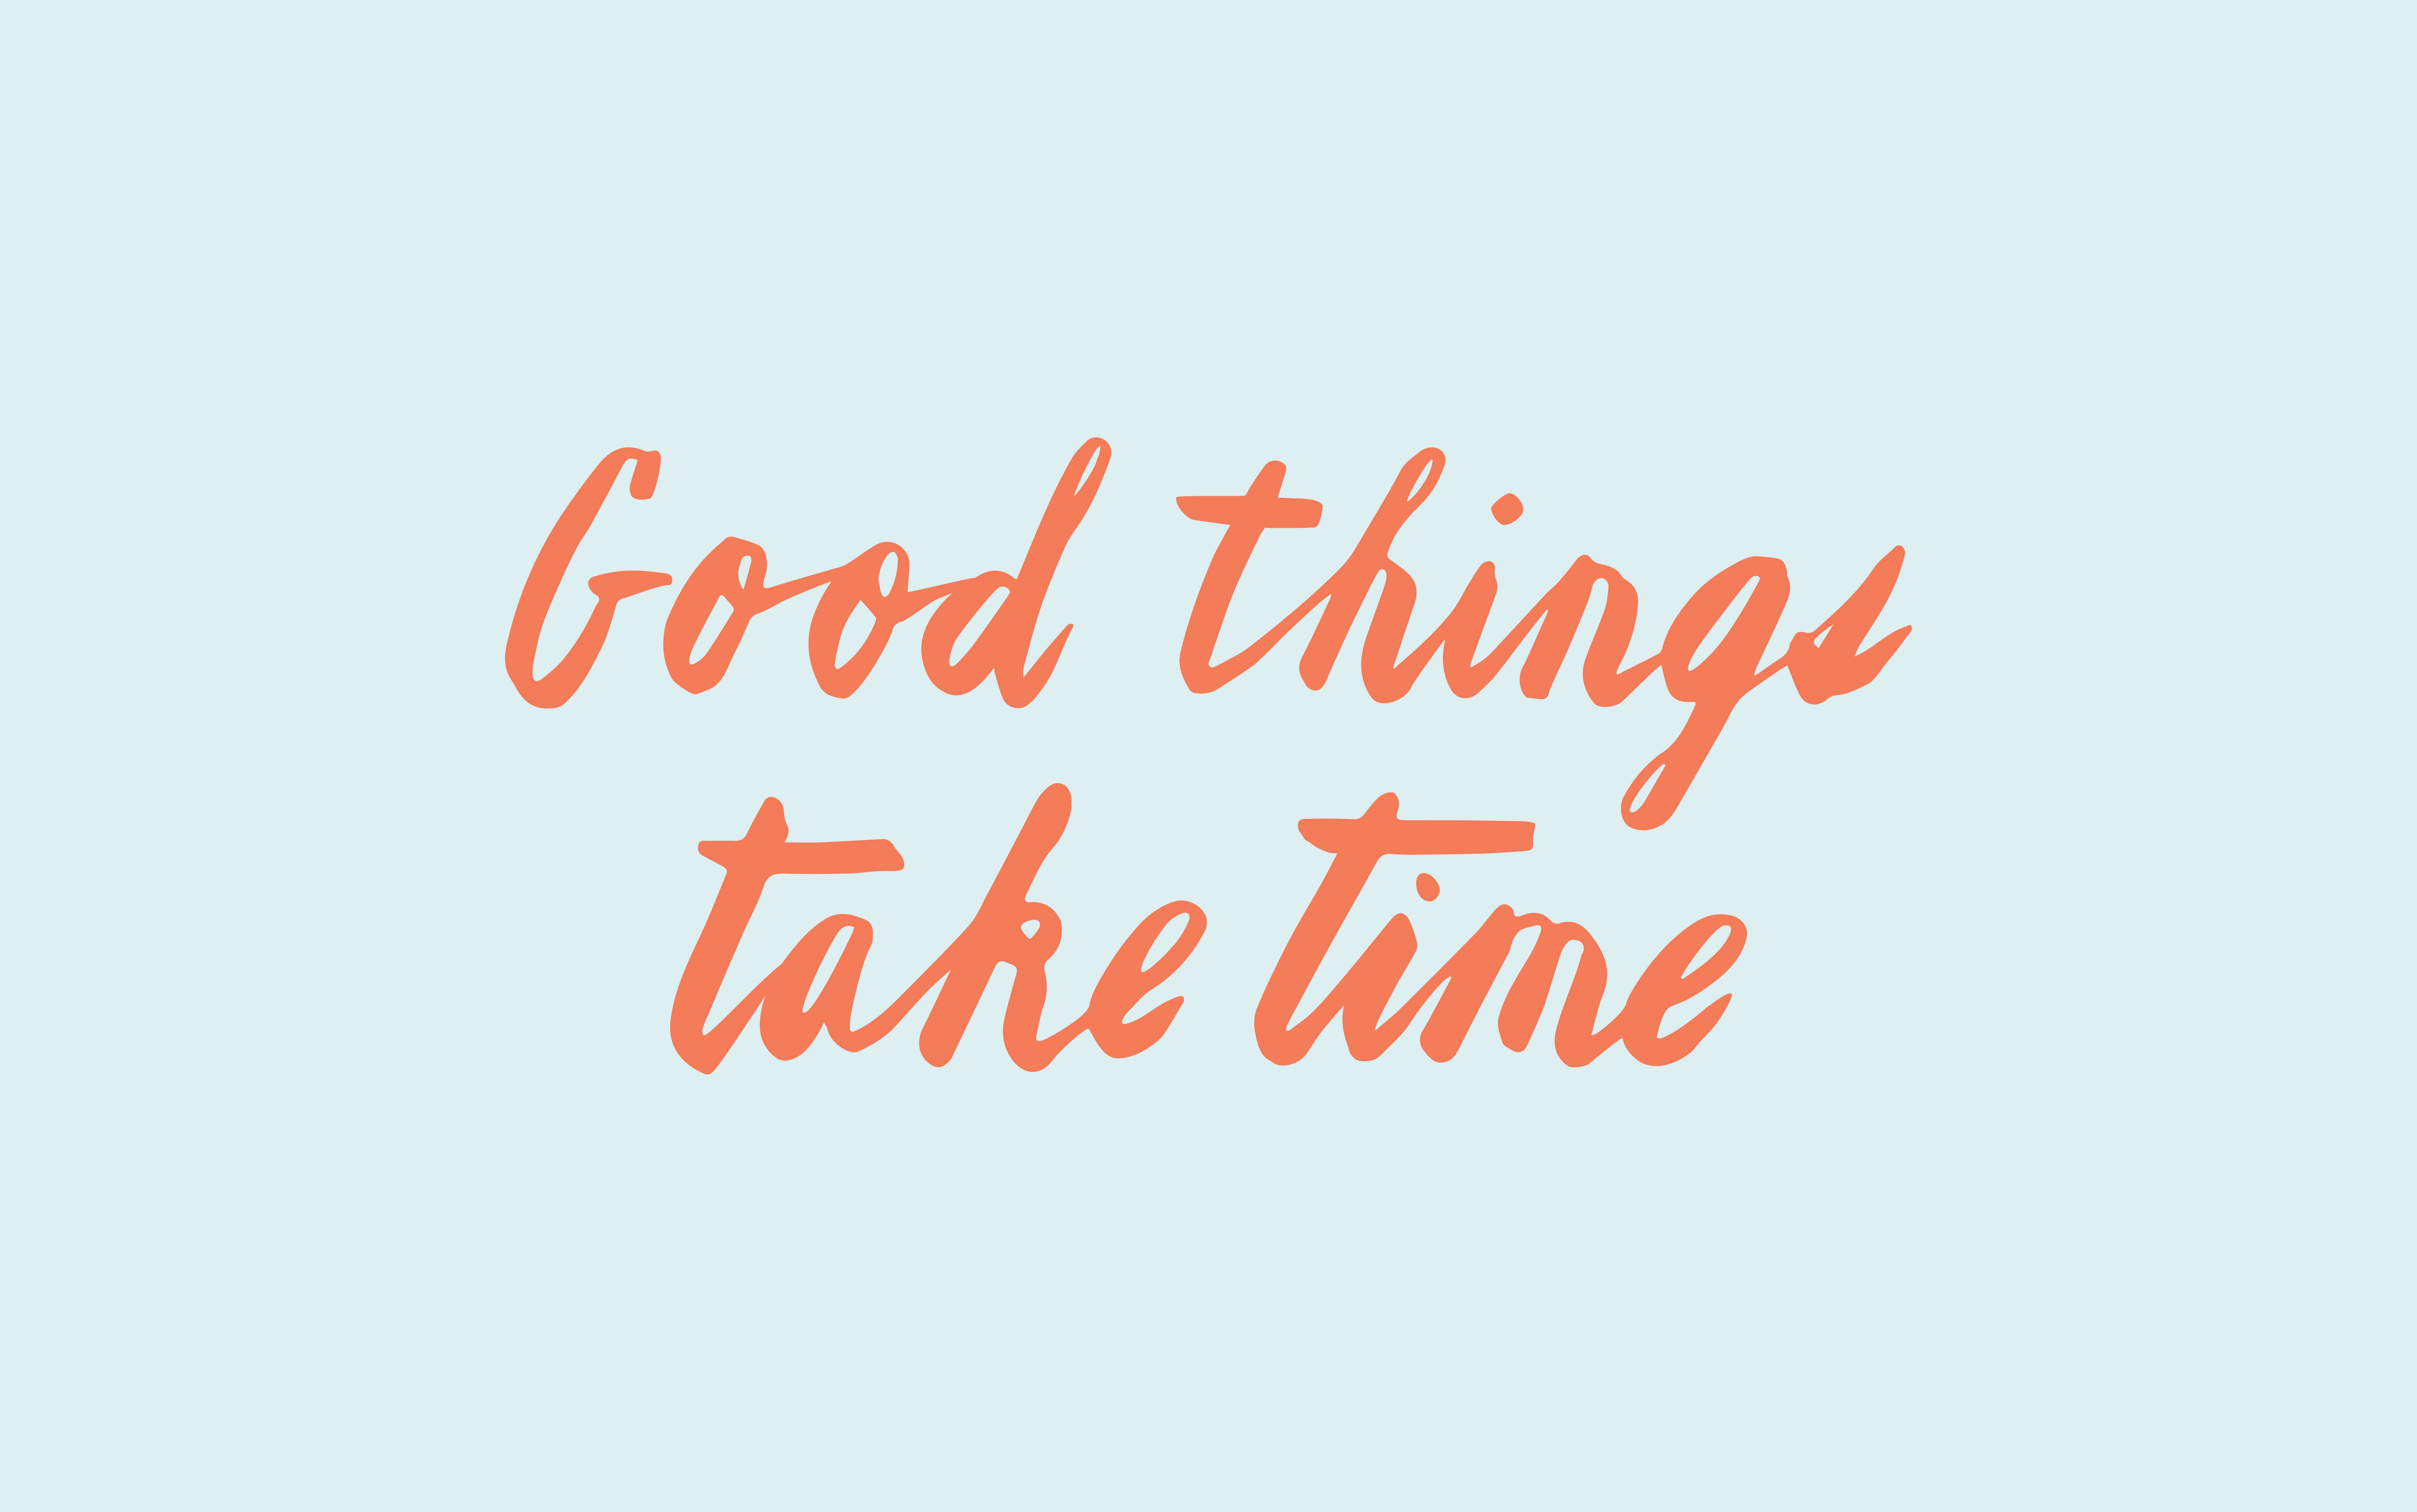 Good things take time - Positive